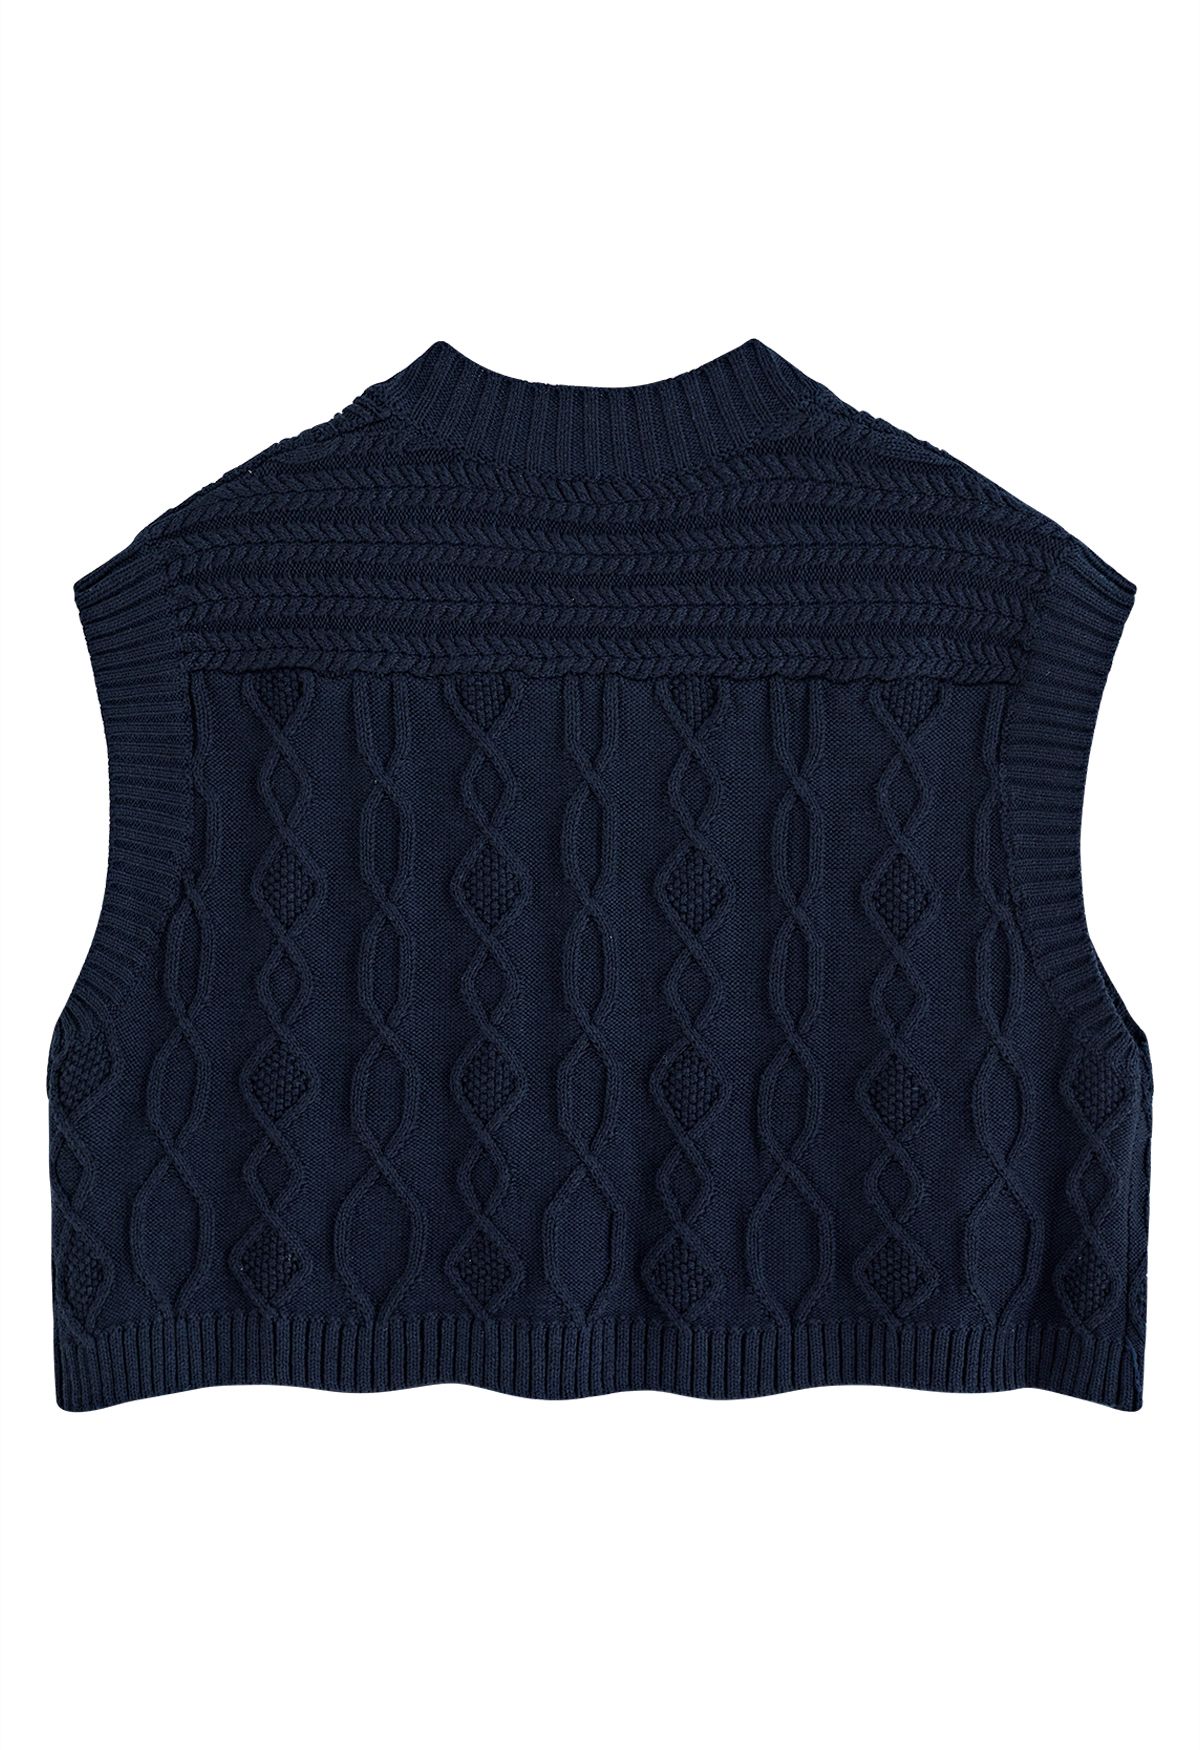 Endearing Braid Texture Vest in Navy